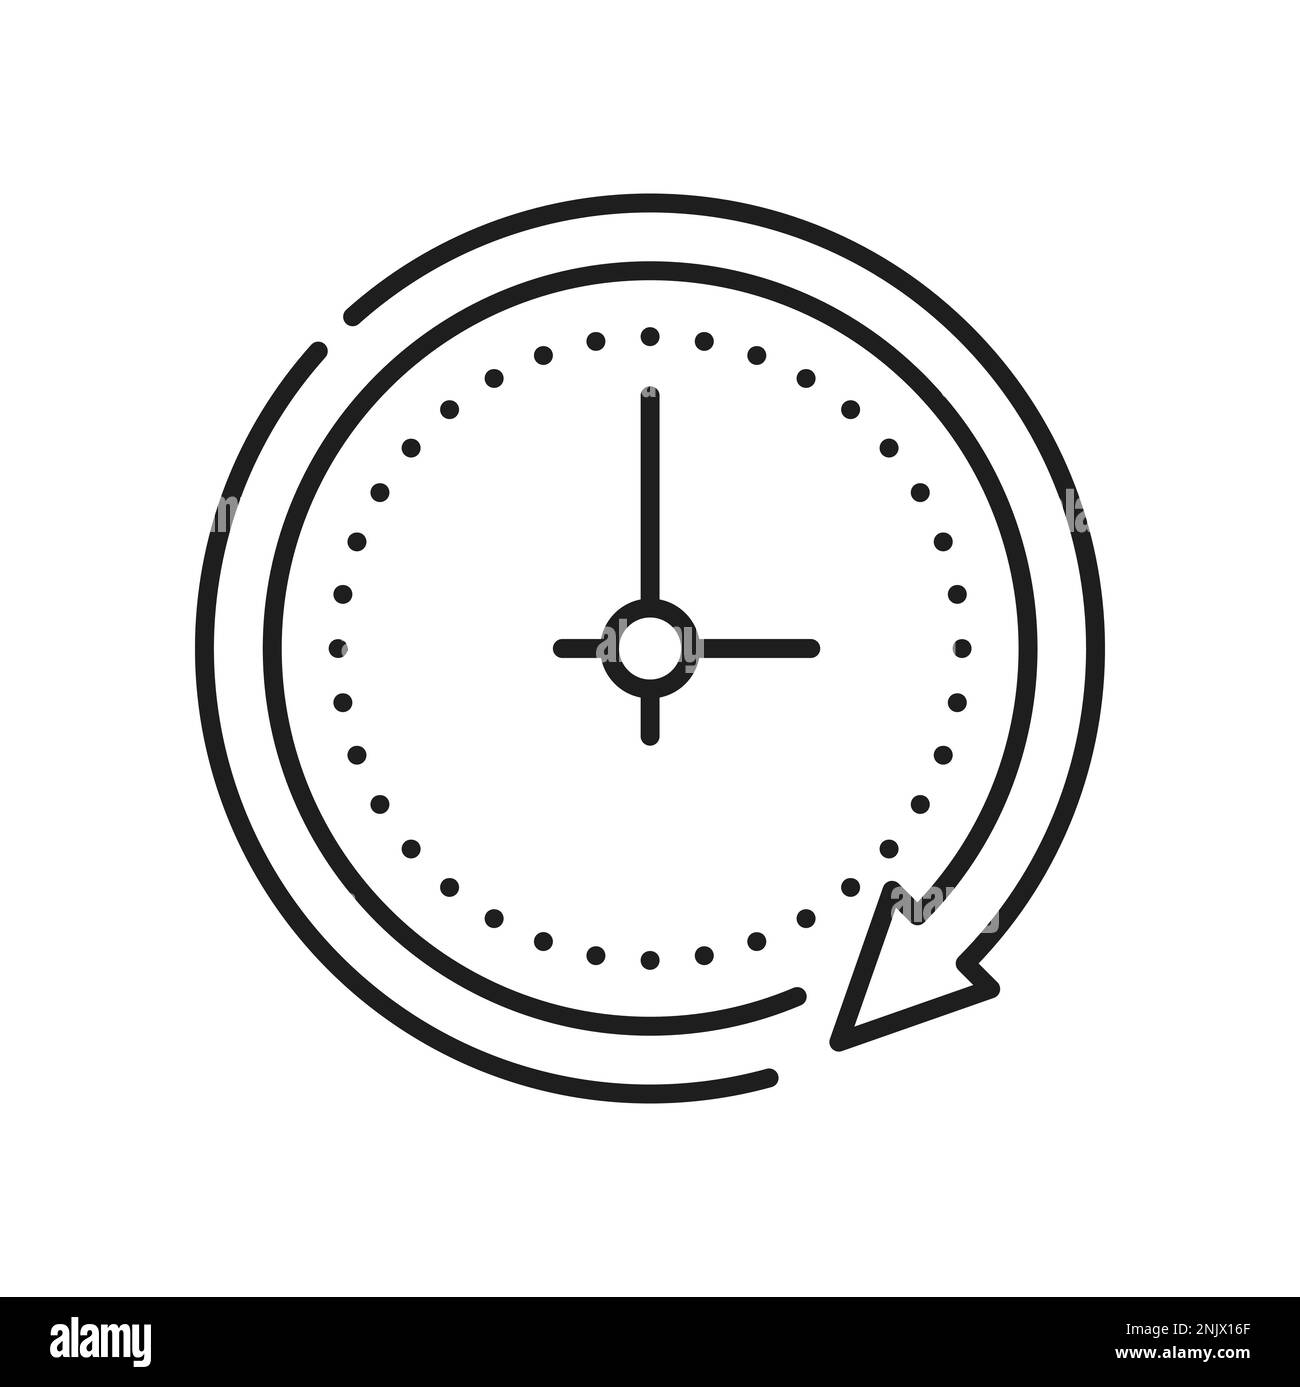 Clock icon with arrow alarm or stopwatch timer Vector Image